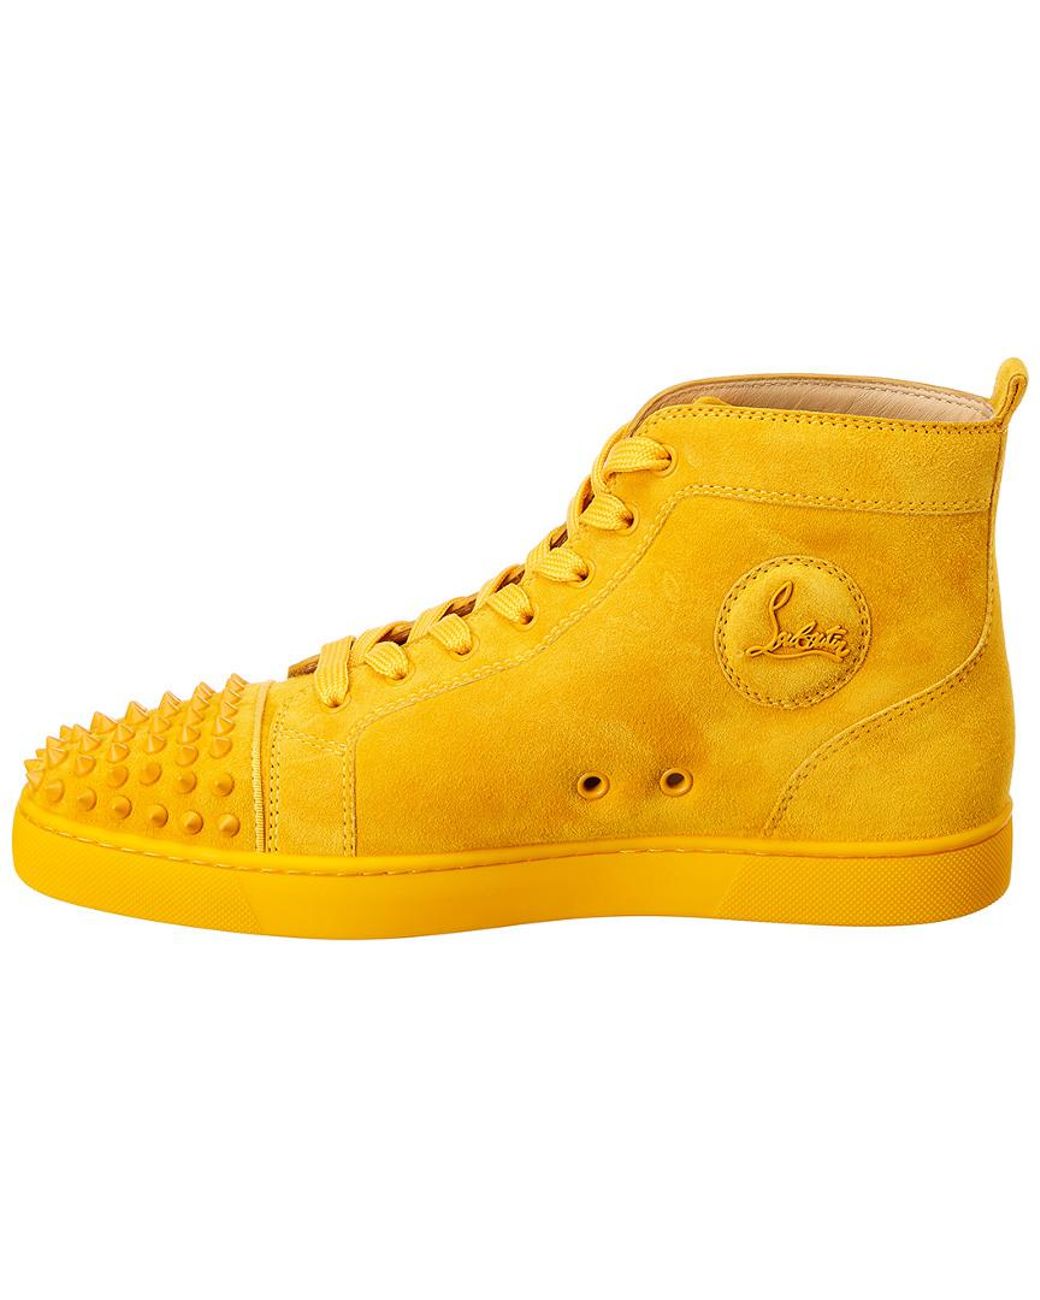 Christian Louboutin Lou Spikes Suede Sneaker in Yellow for Men | Lyst